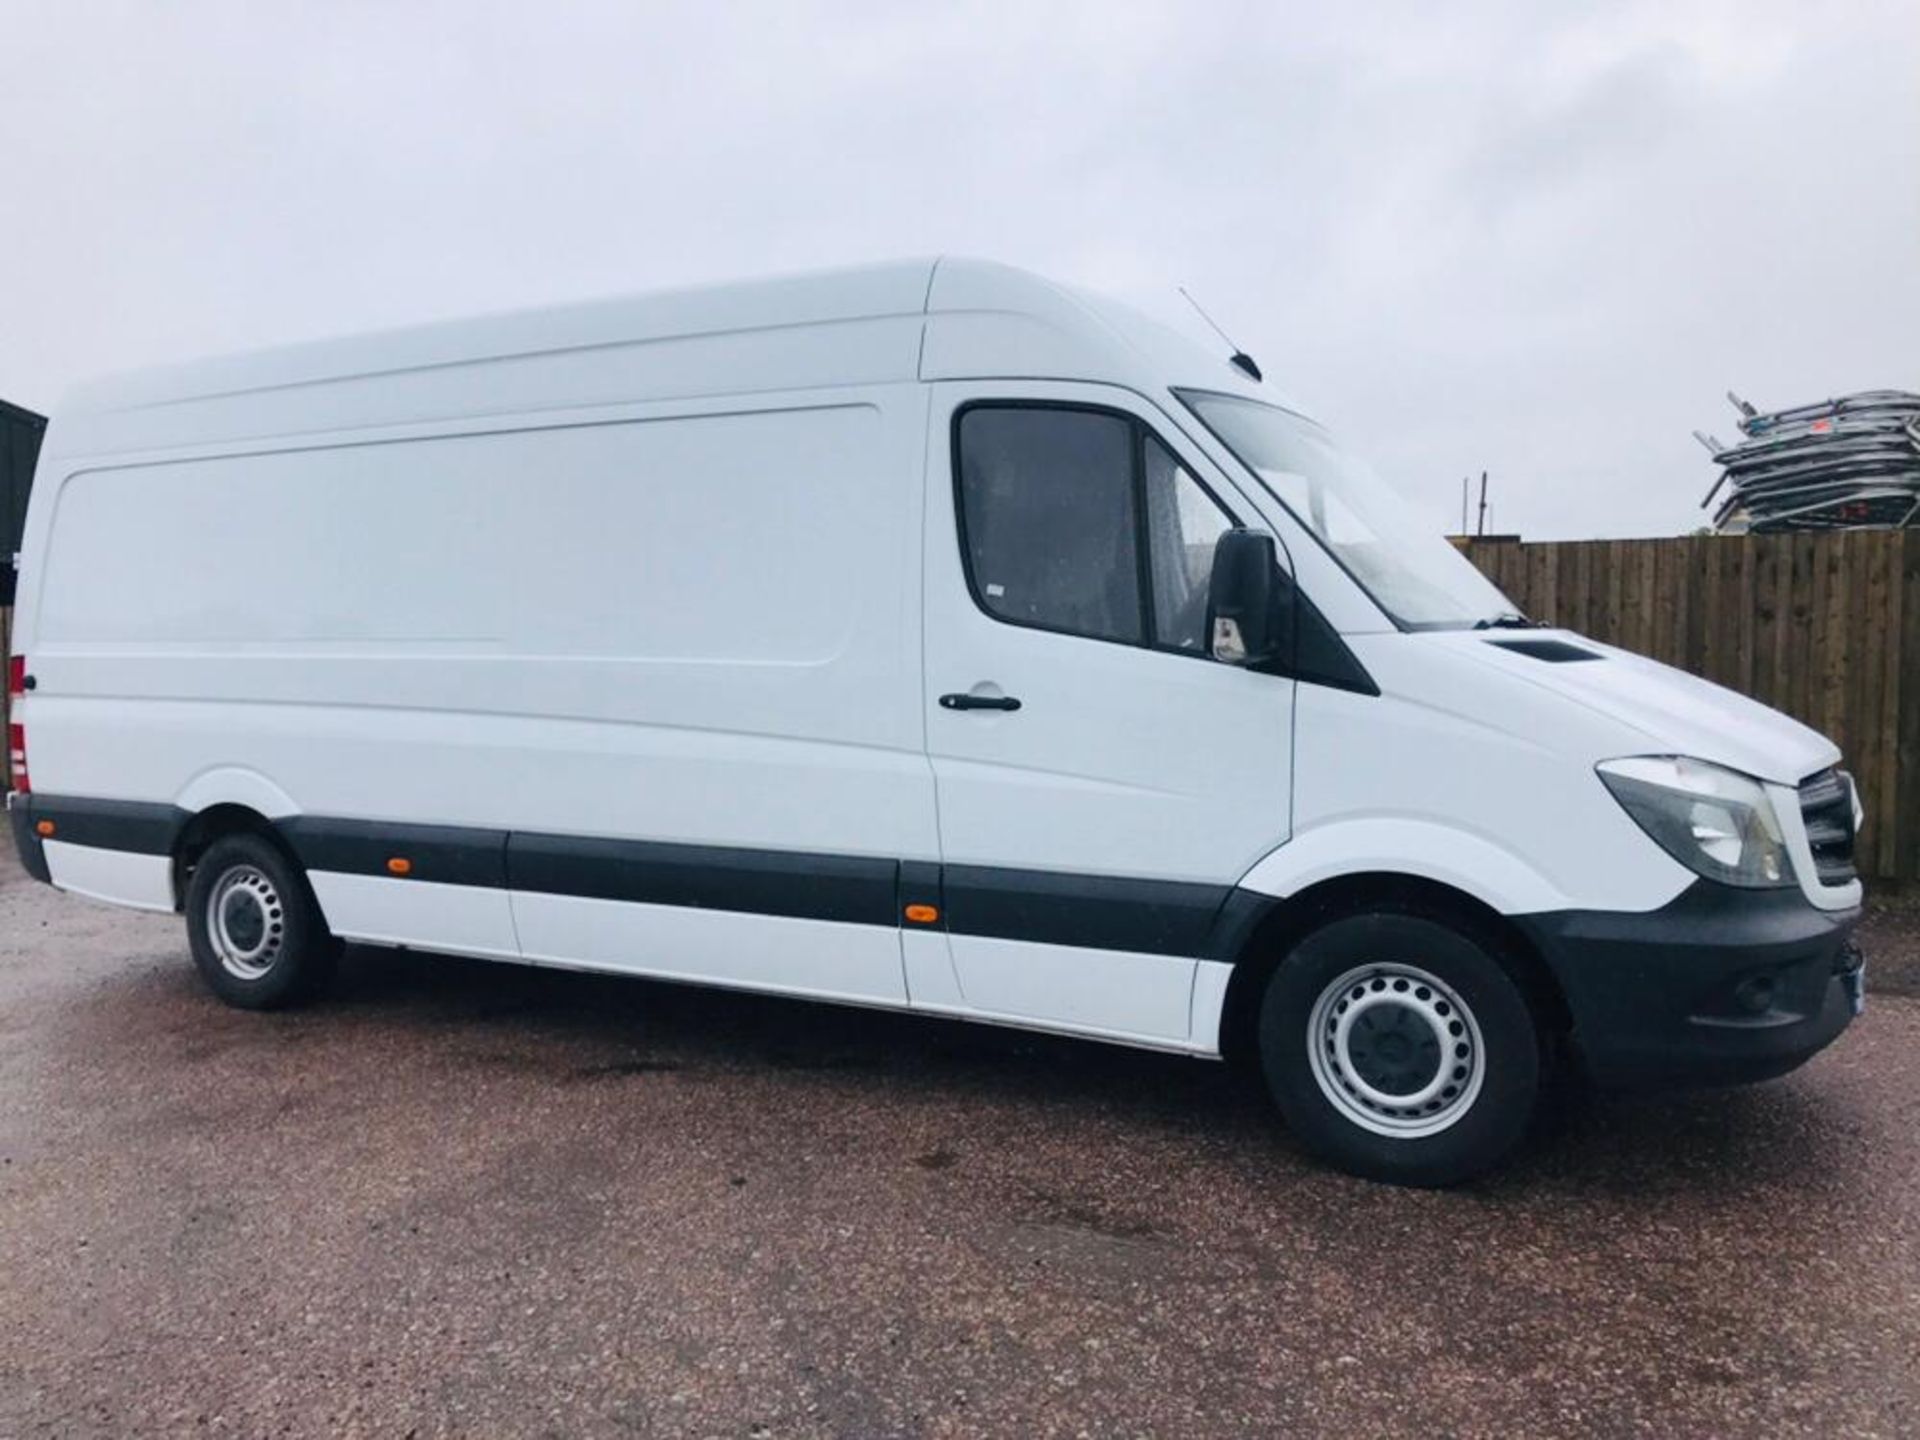 (ON SALE) MERCEDES SPRINTER 314CDI "140BHP" LWB (2018 MODEL) EURO 6 - LONDON COMPLIANT-DONT MISS OUT